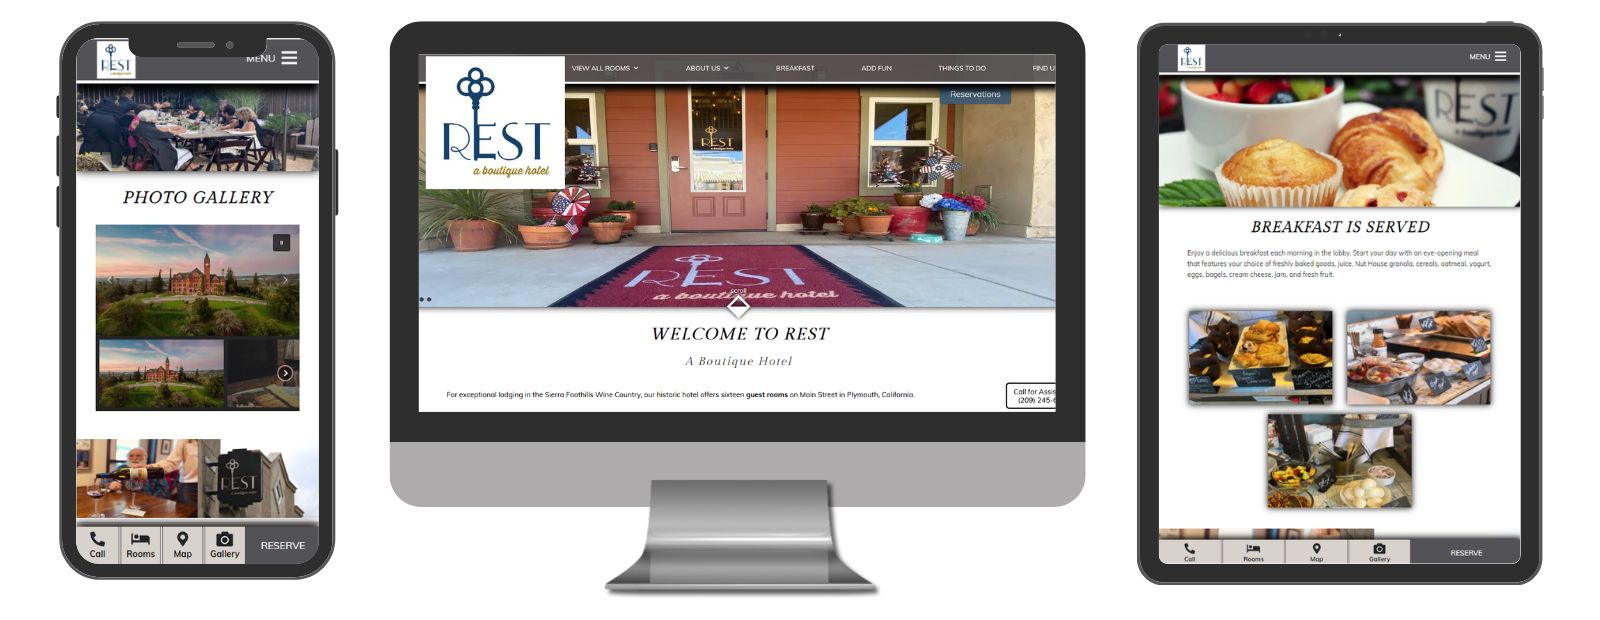 Mobile, template and desktop view of new website for Rest - A Boutique Hotel